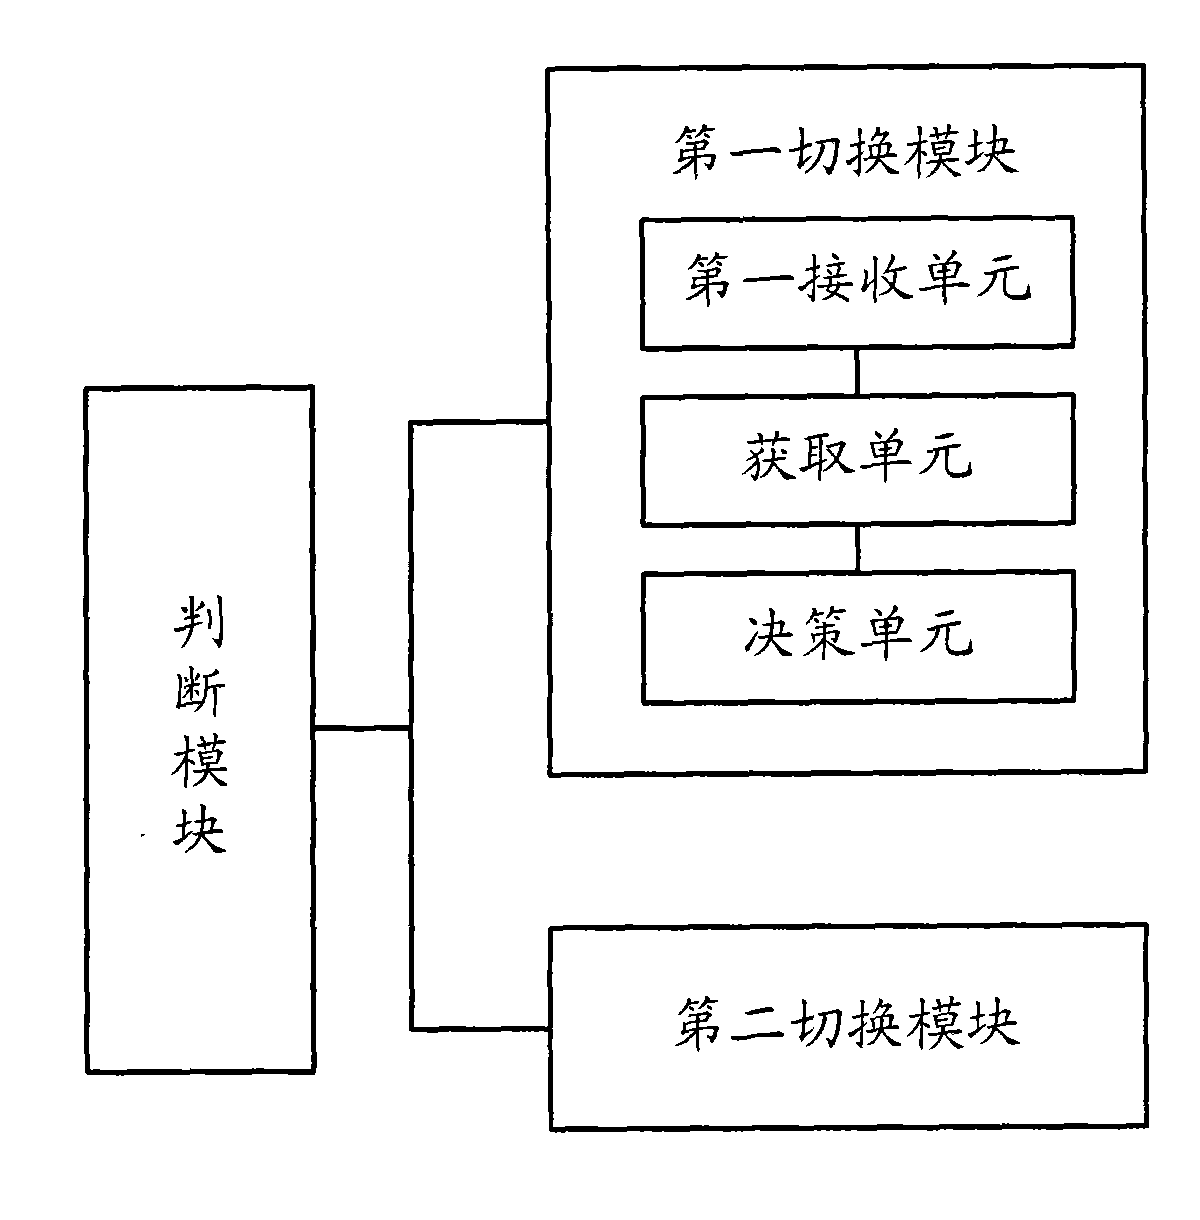 Mobile restriction implementation method of mobile communication terminal and CG gateway